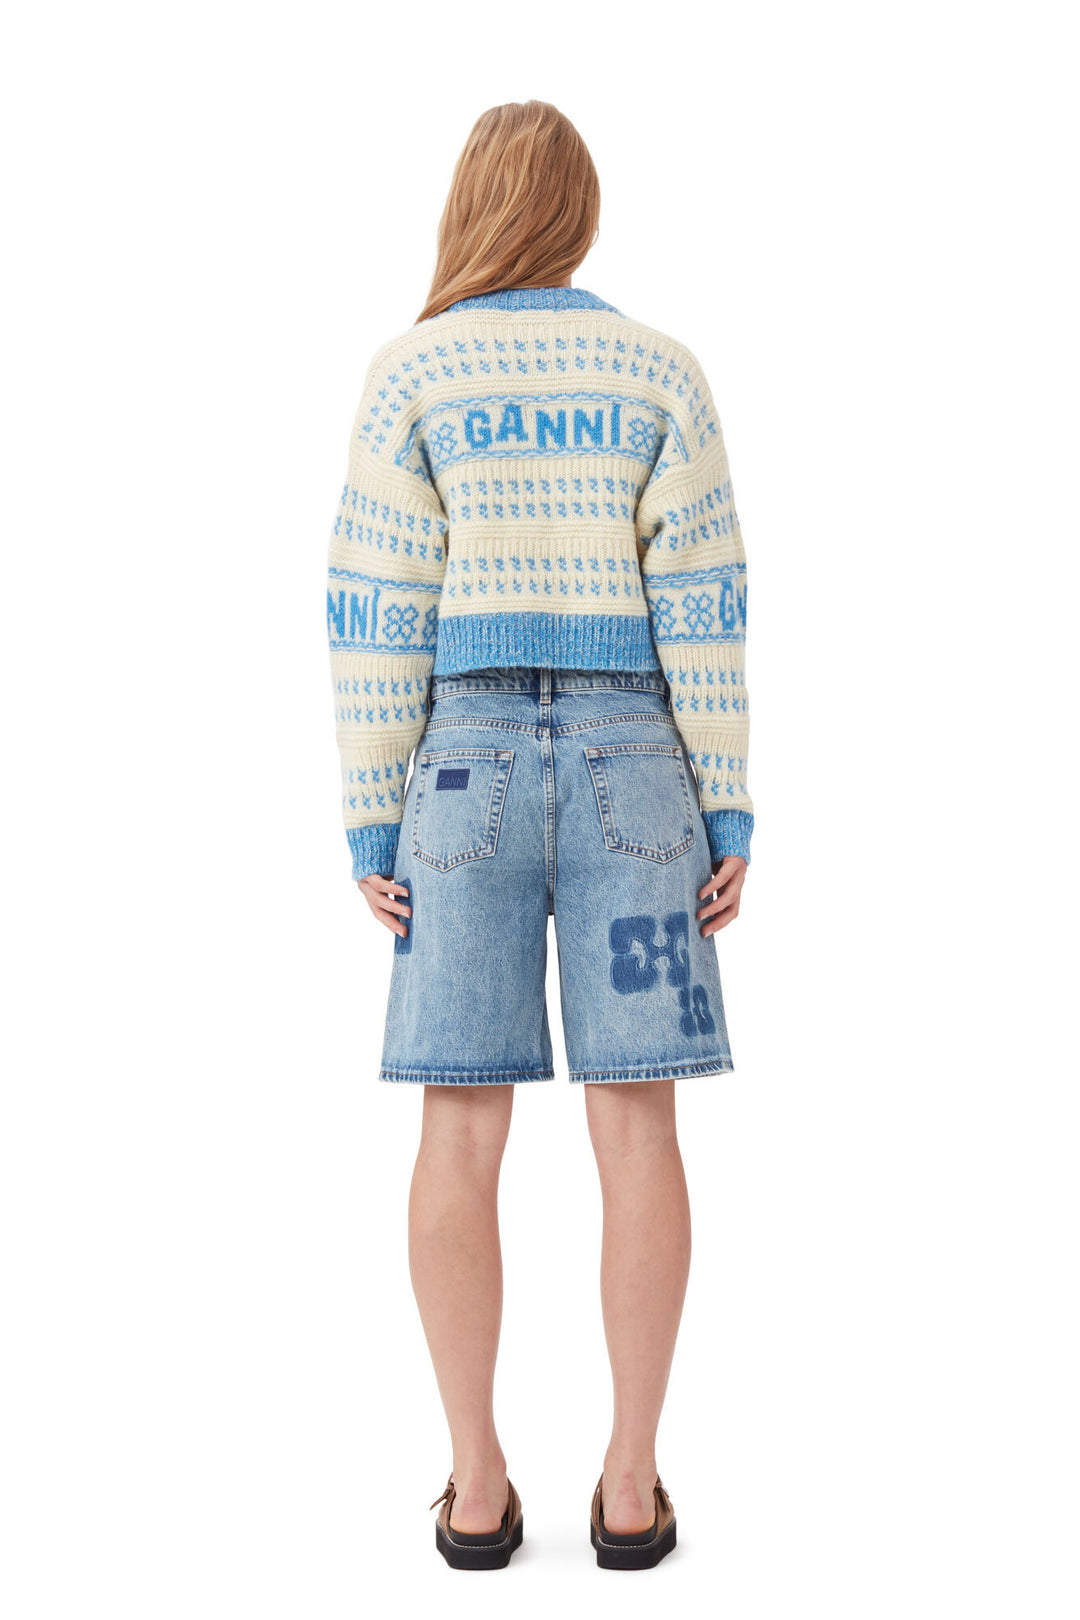 GANNI - Graphic Lambswool Cropped O-neck - Dale